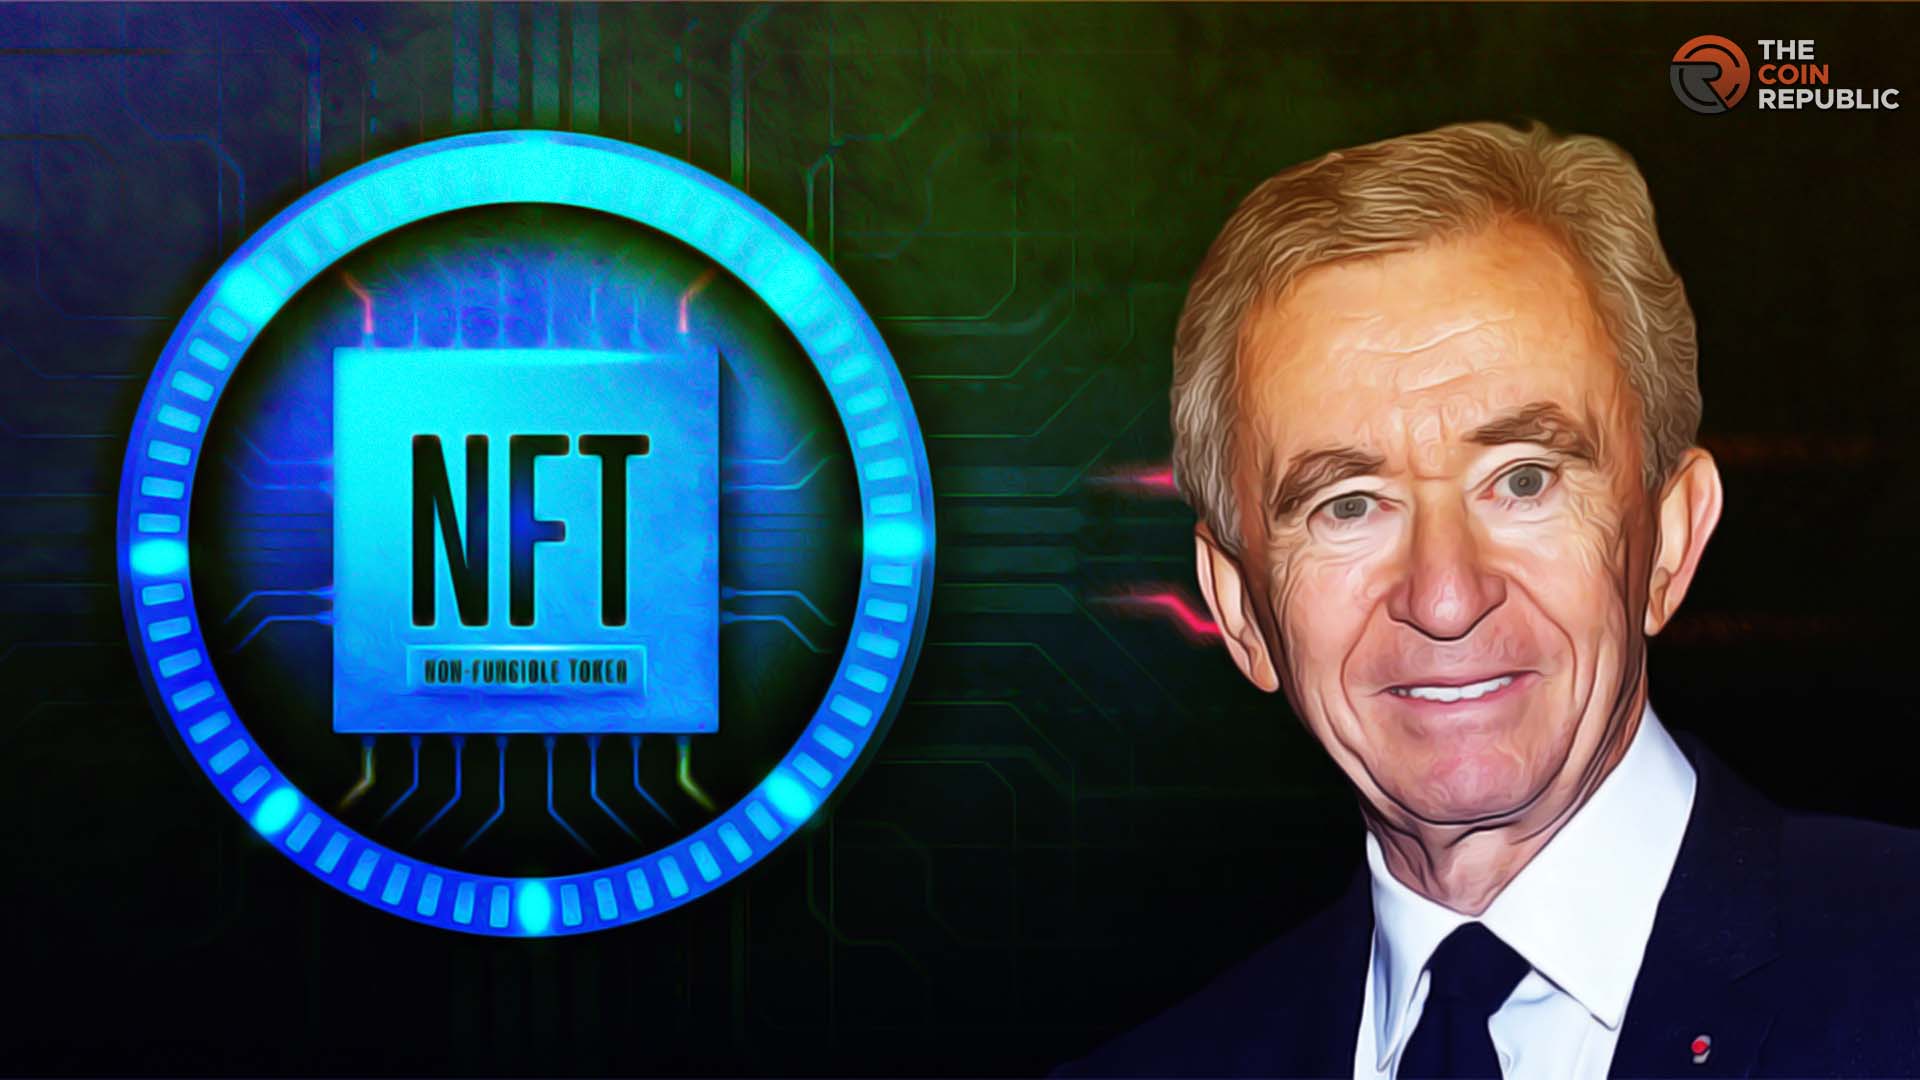 The NFT collection is owned by the world’s richest man, Bernard Arnault